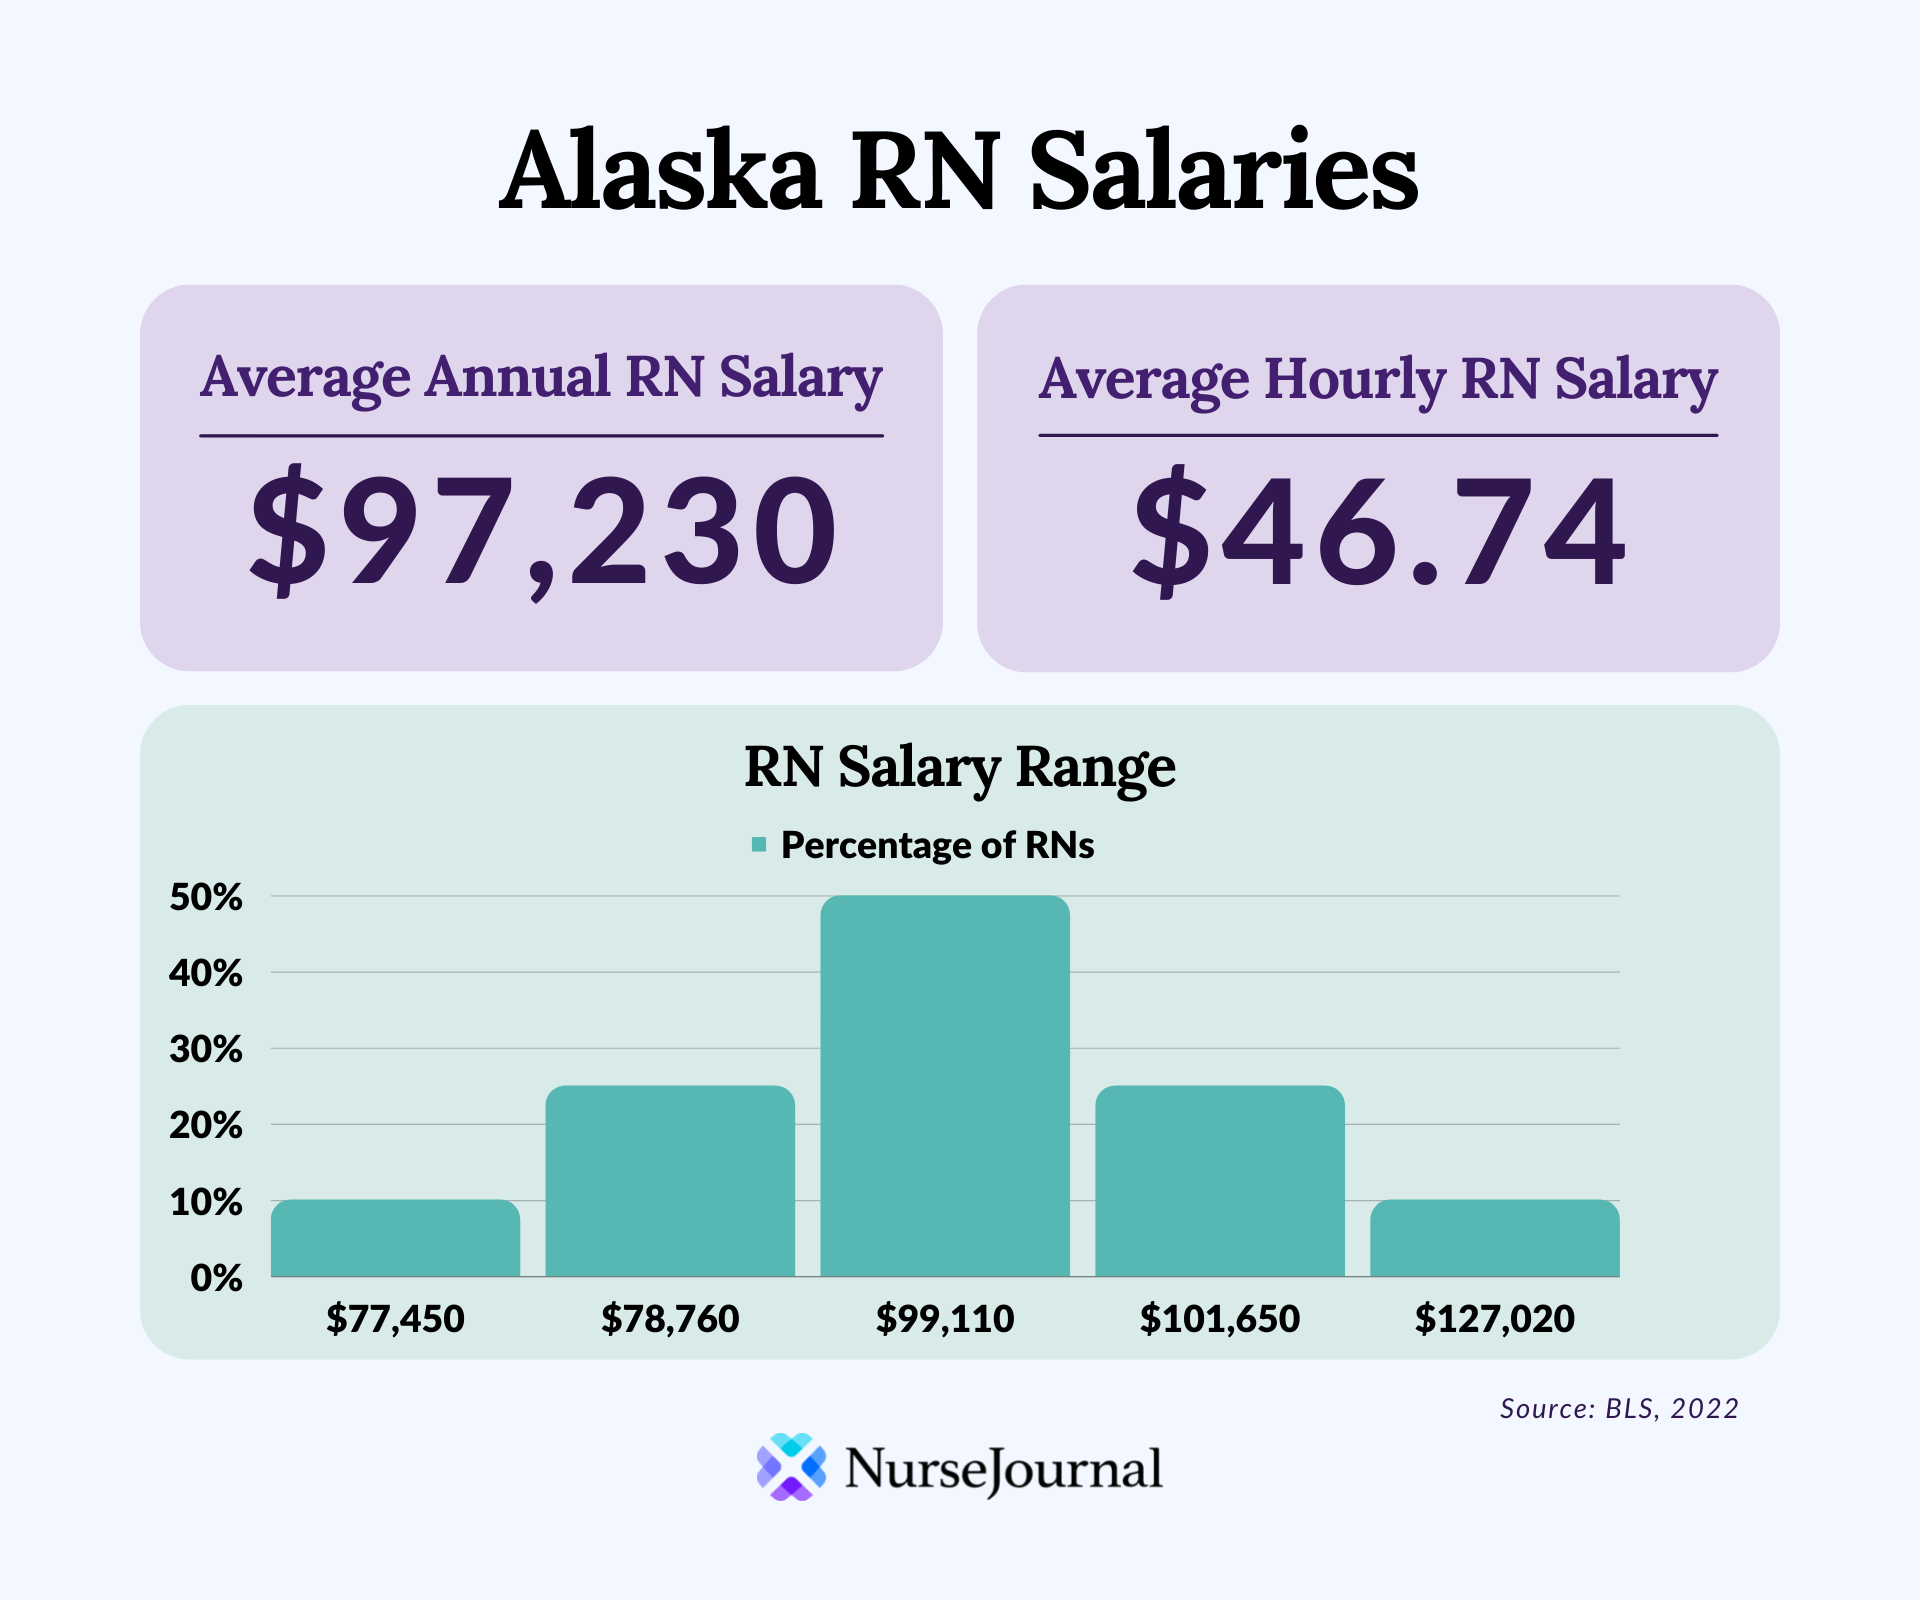 Infographic of registered nursing salary data in Alaska. The average annual RN salary is $97,230. The average hourly RN salary is $46.74. Average RN salaries range from $77,450 among the bottom 10th percentile of earners to $127,020 among the top 90th percentile of earners.